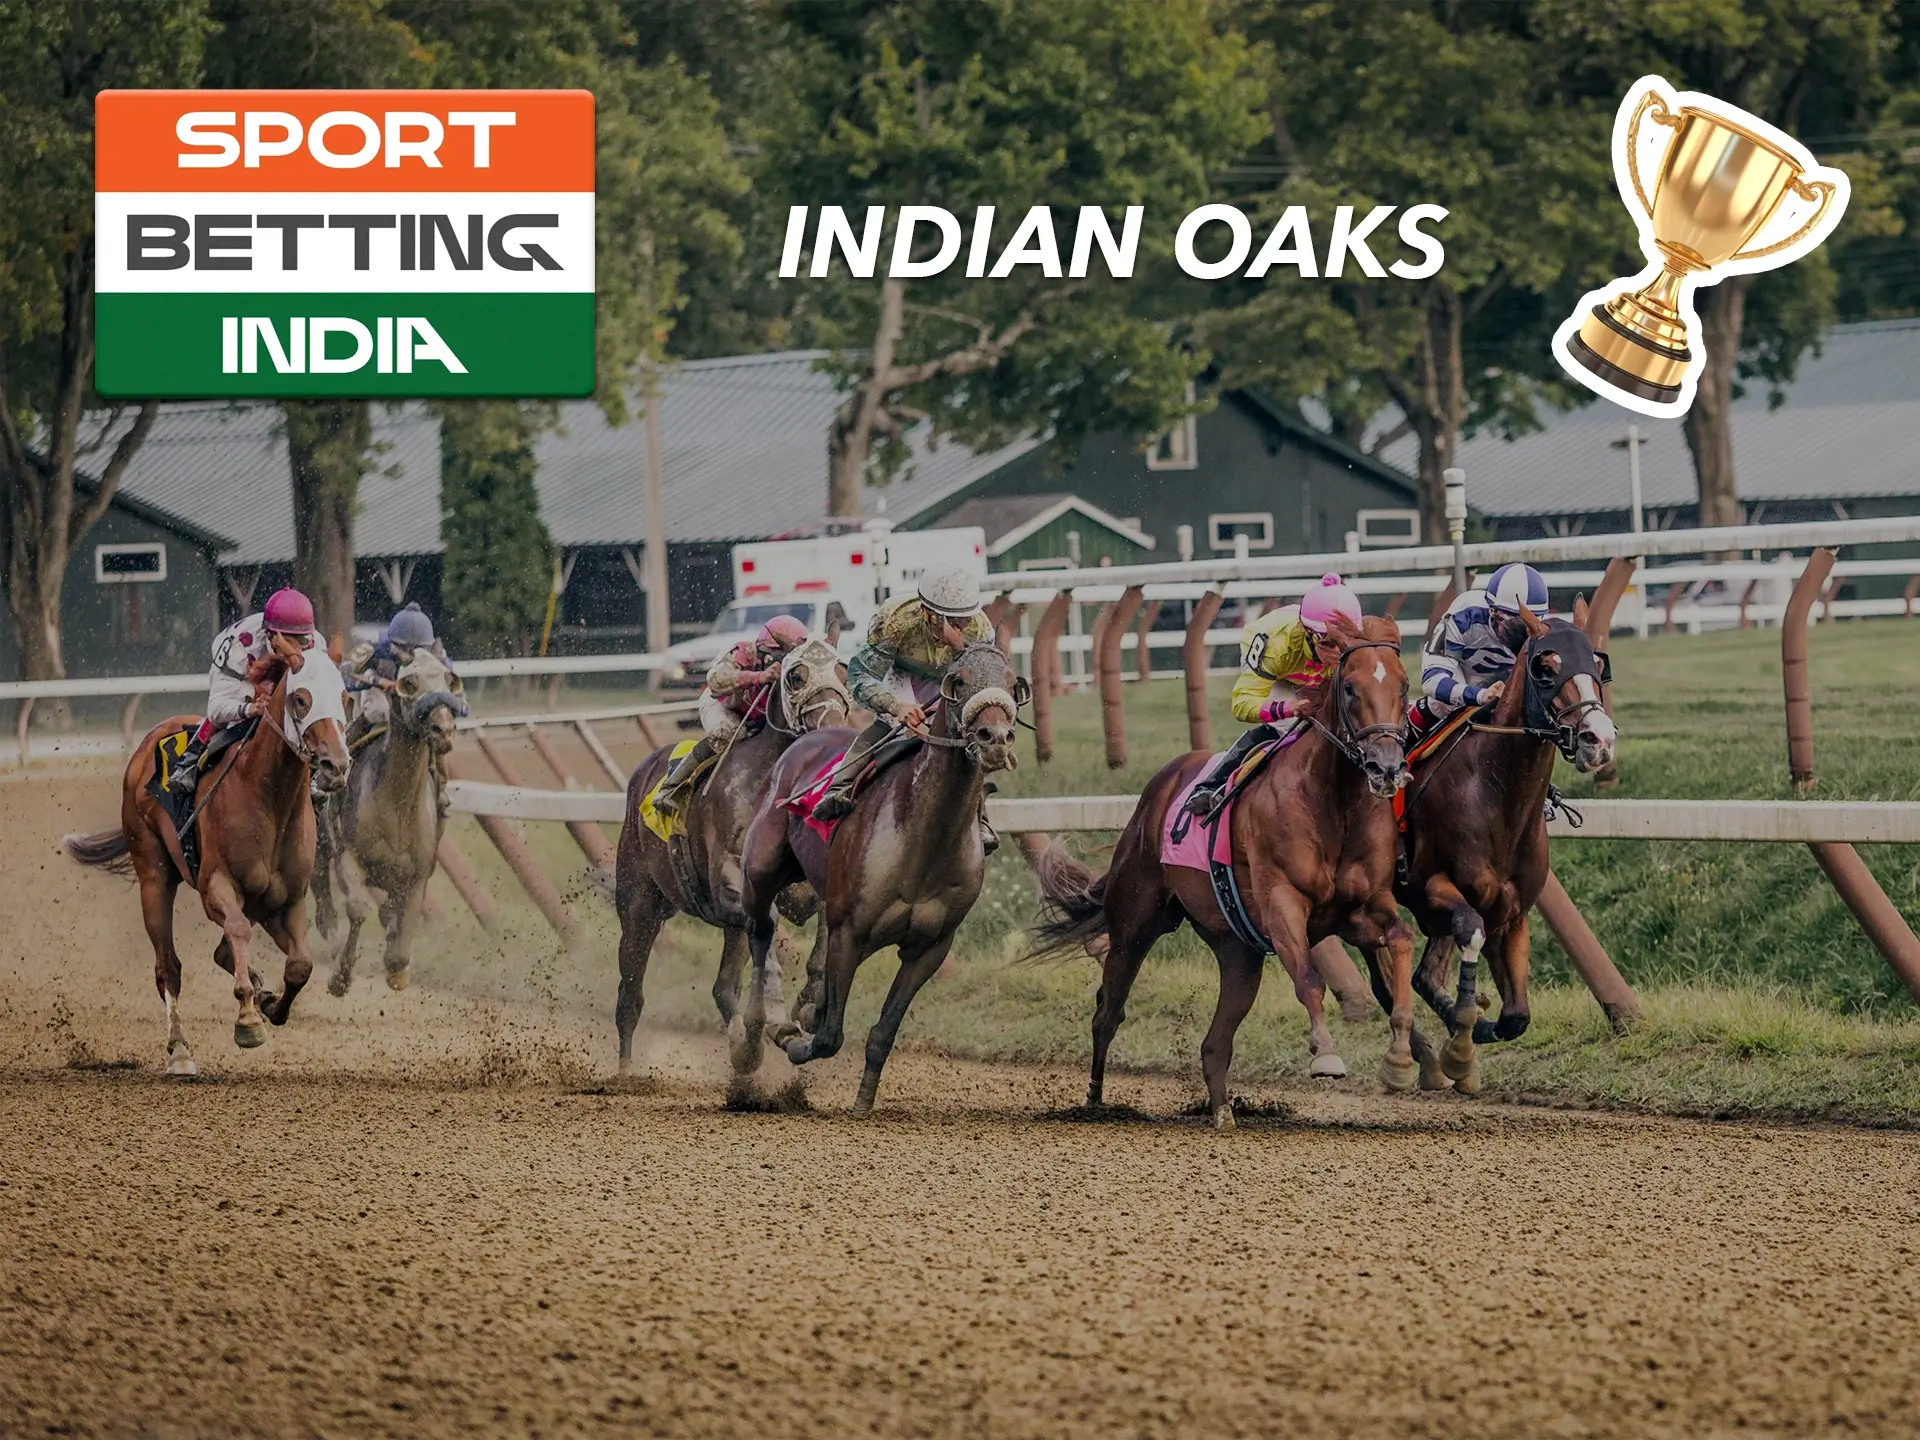 Try your luck by betting on the important Indian Oaks horse racing tournament.